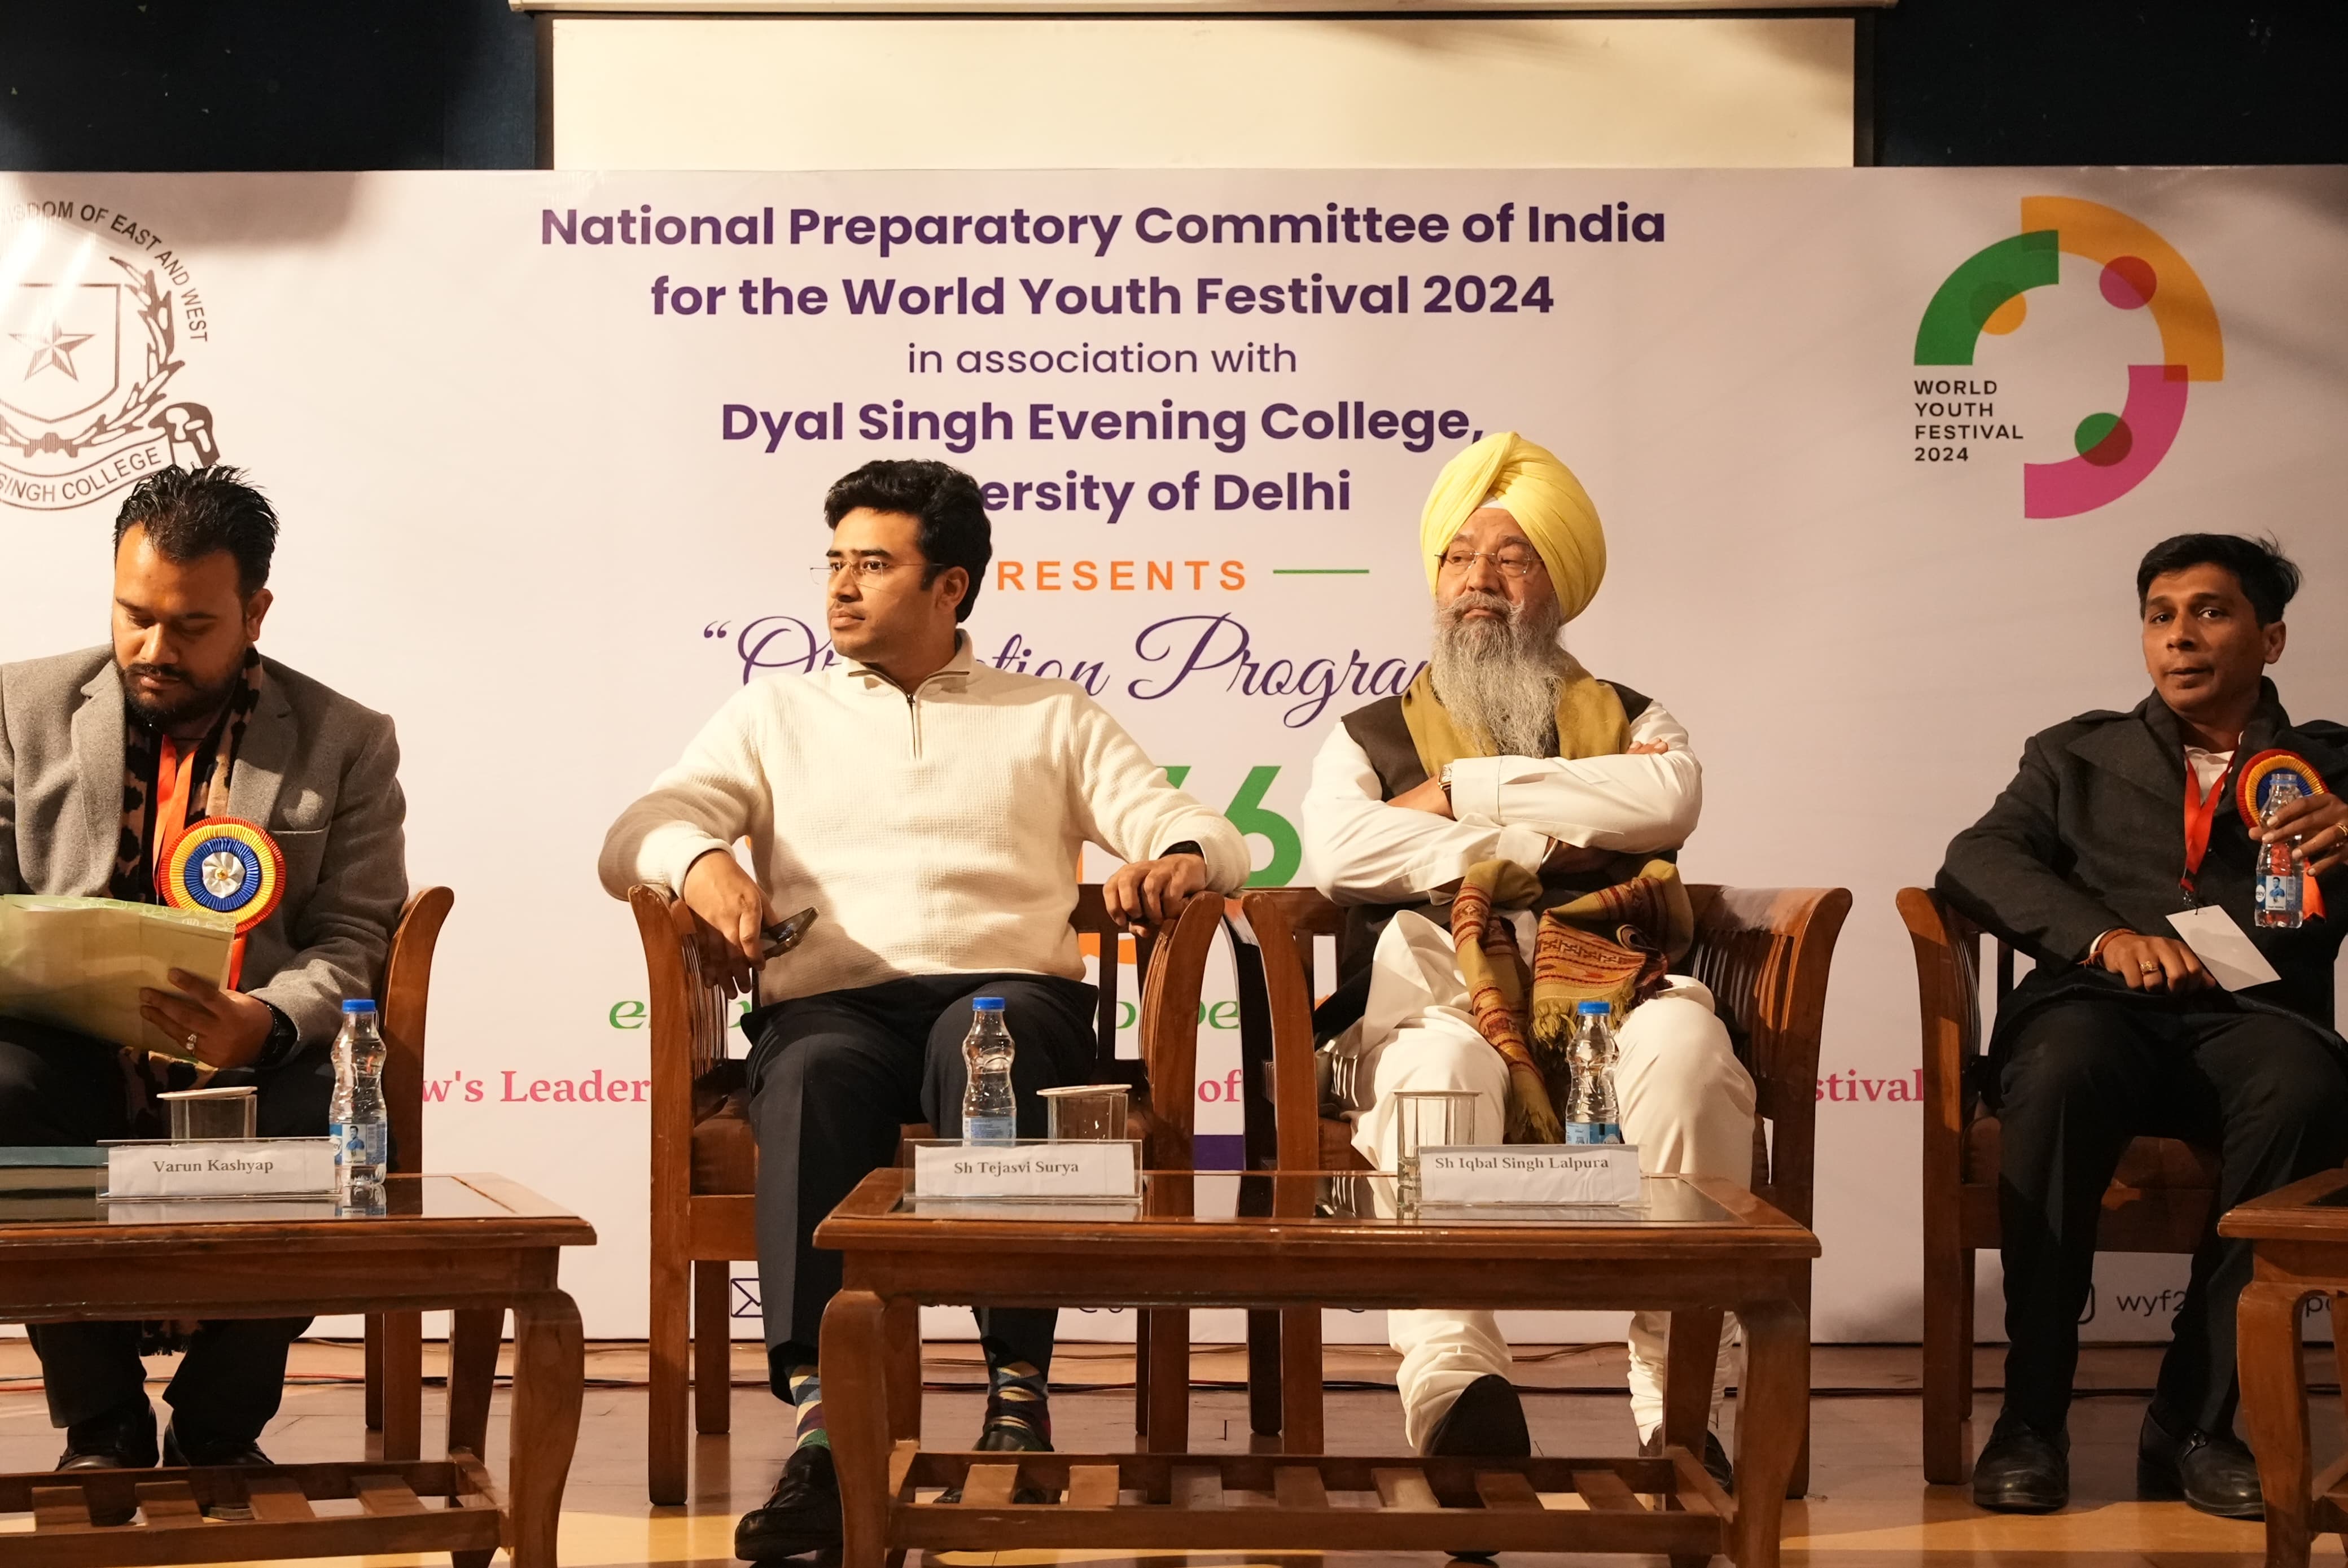 360 Dynamic Young Leaders Chosen to Showcase India’s Spirit at World Youth Festival